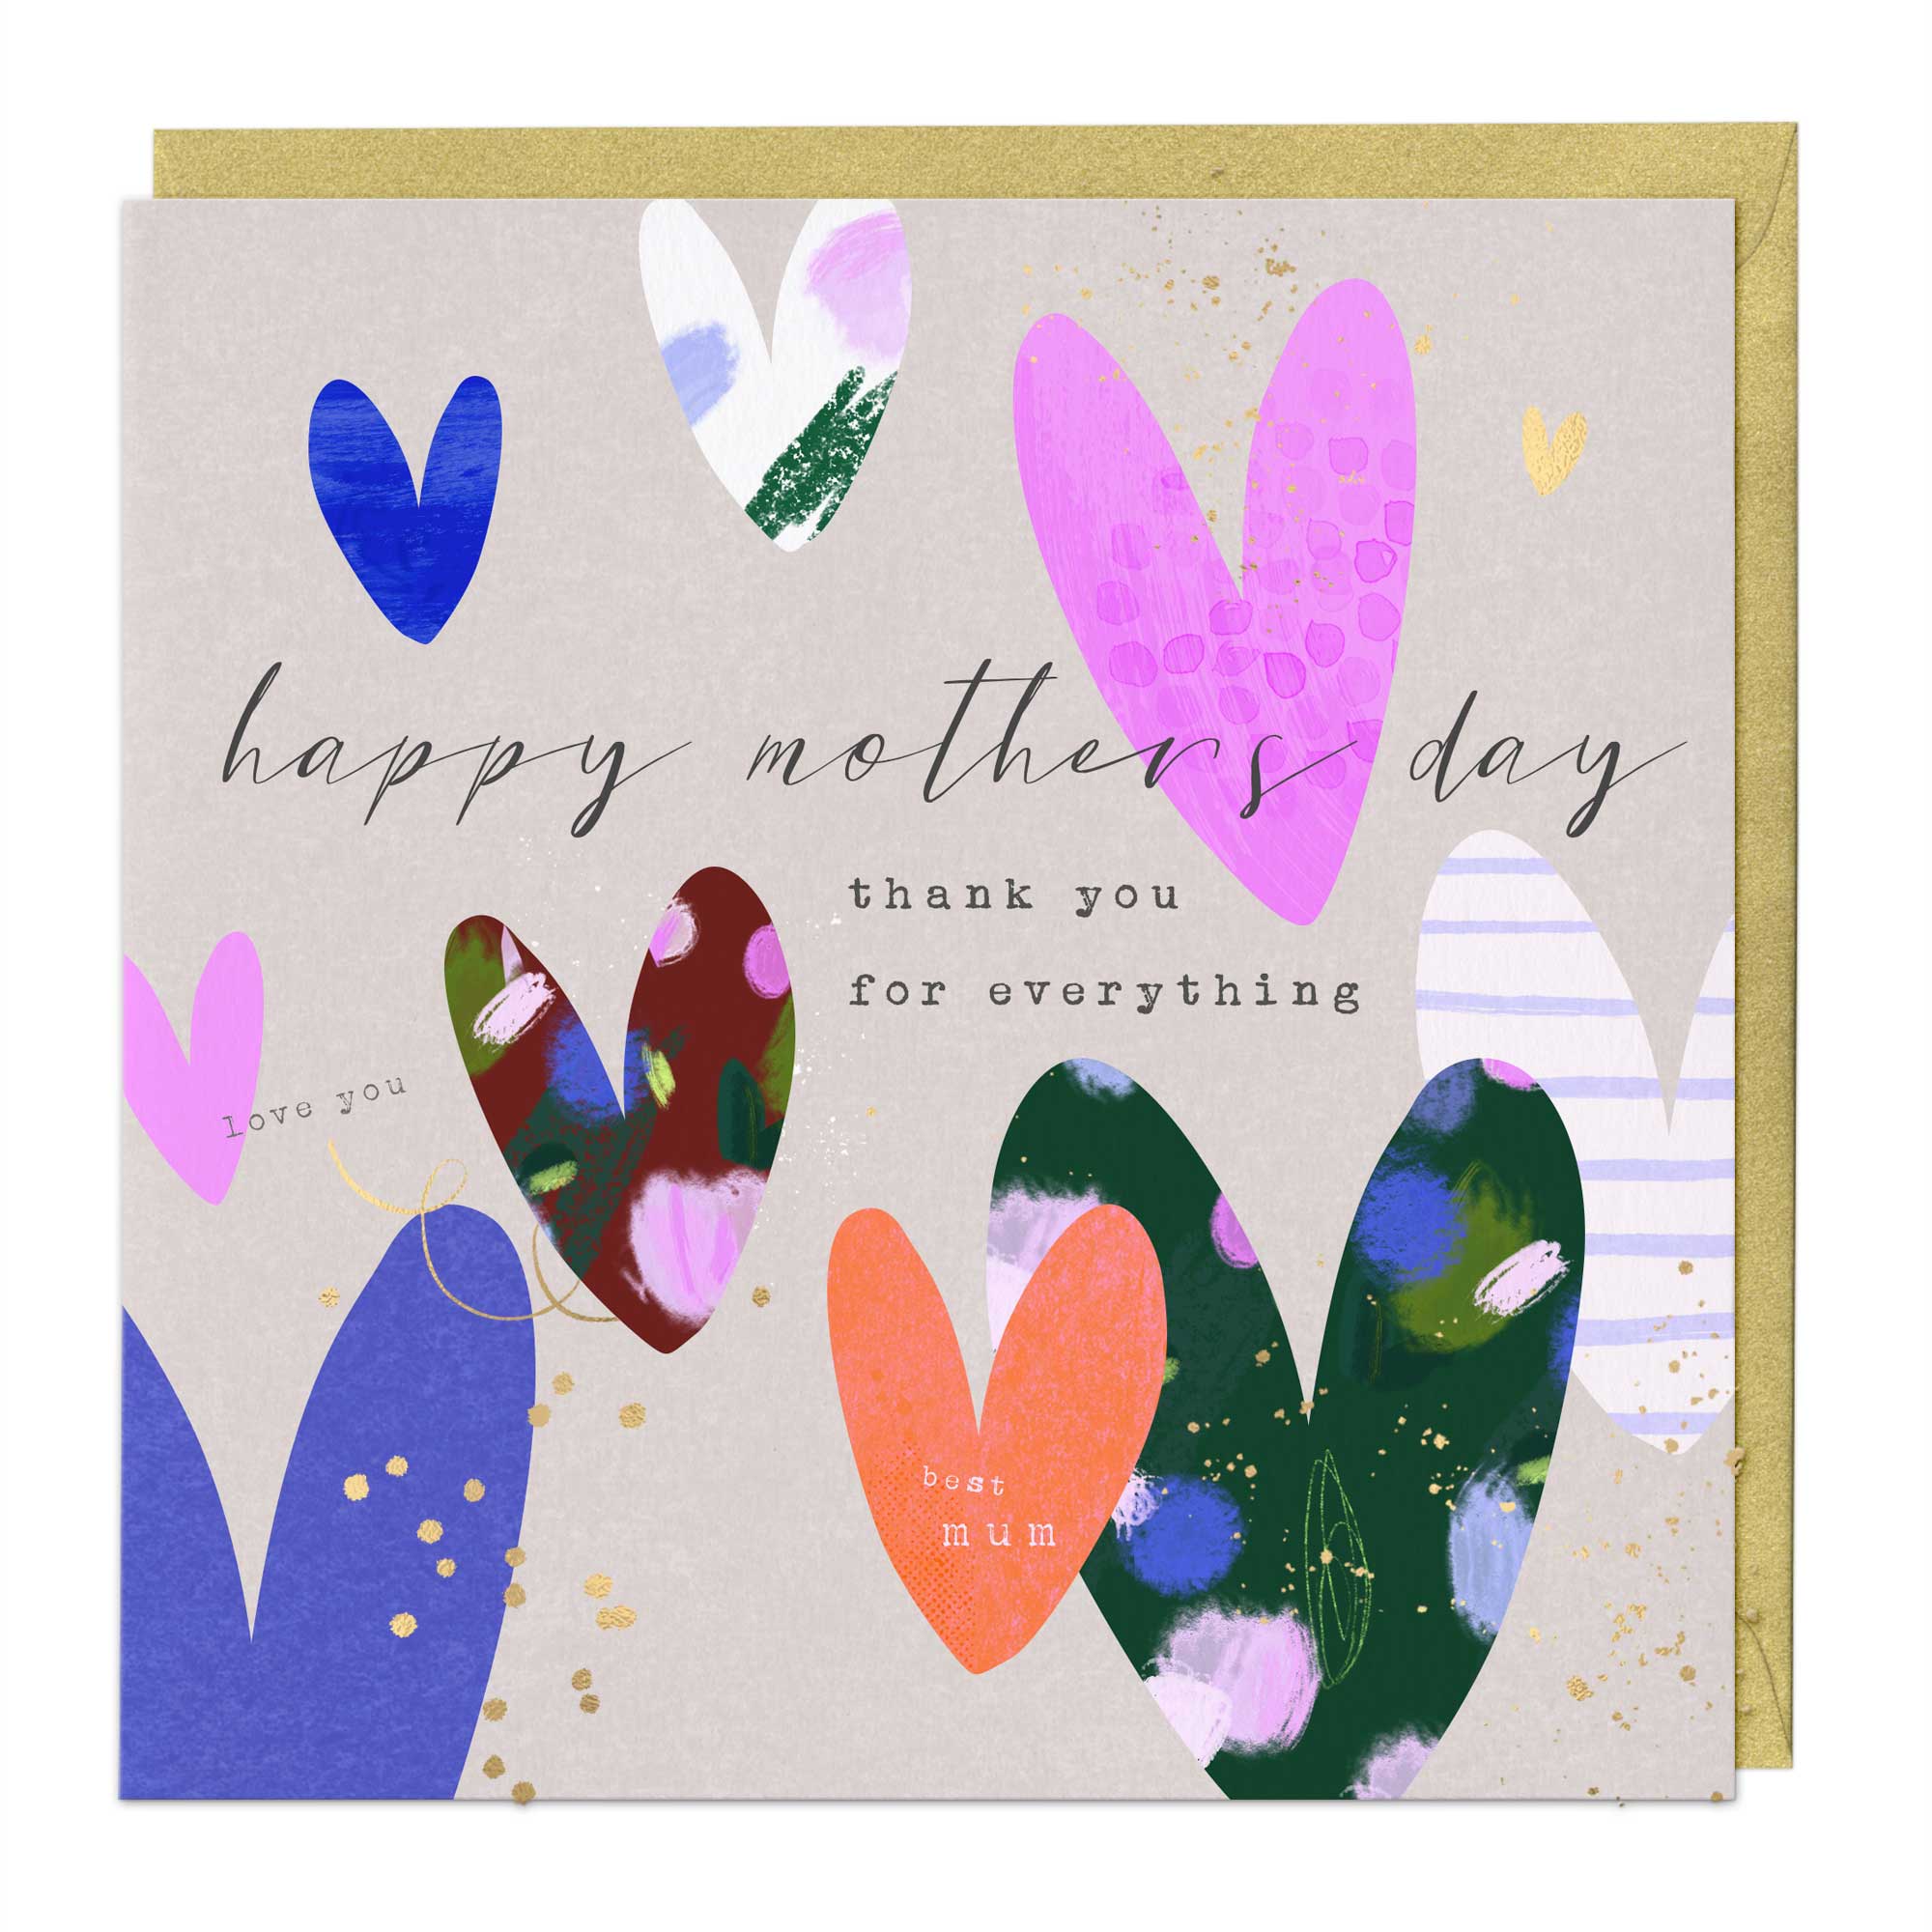 25+ Gorgeously Sentimental Valentine's Day Cards - Card Ideas for